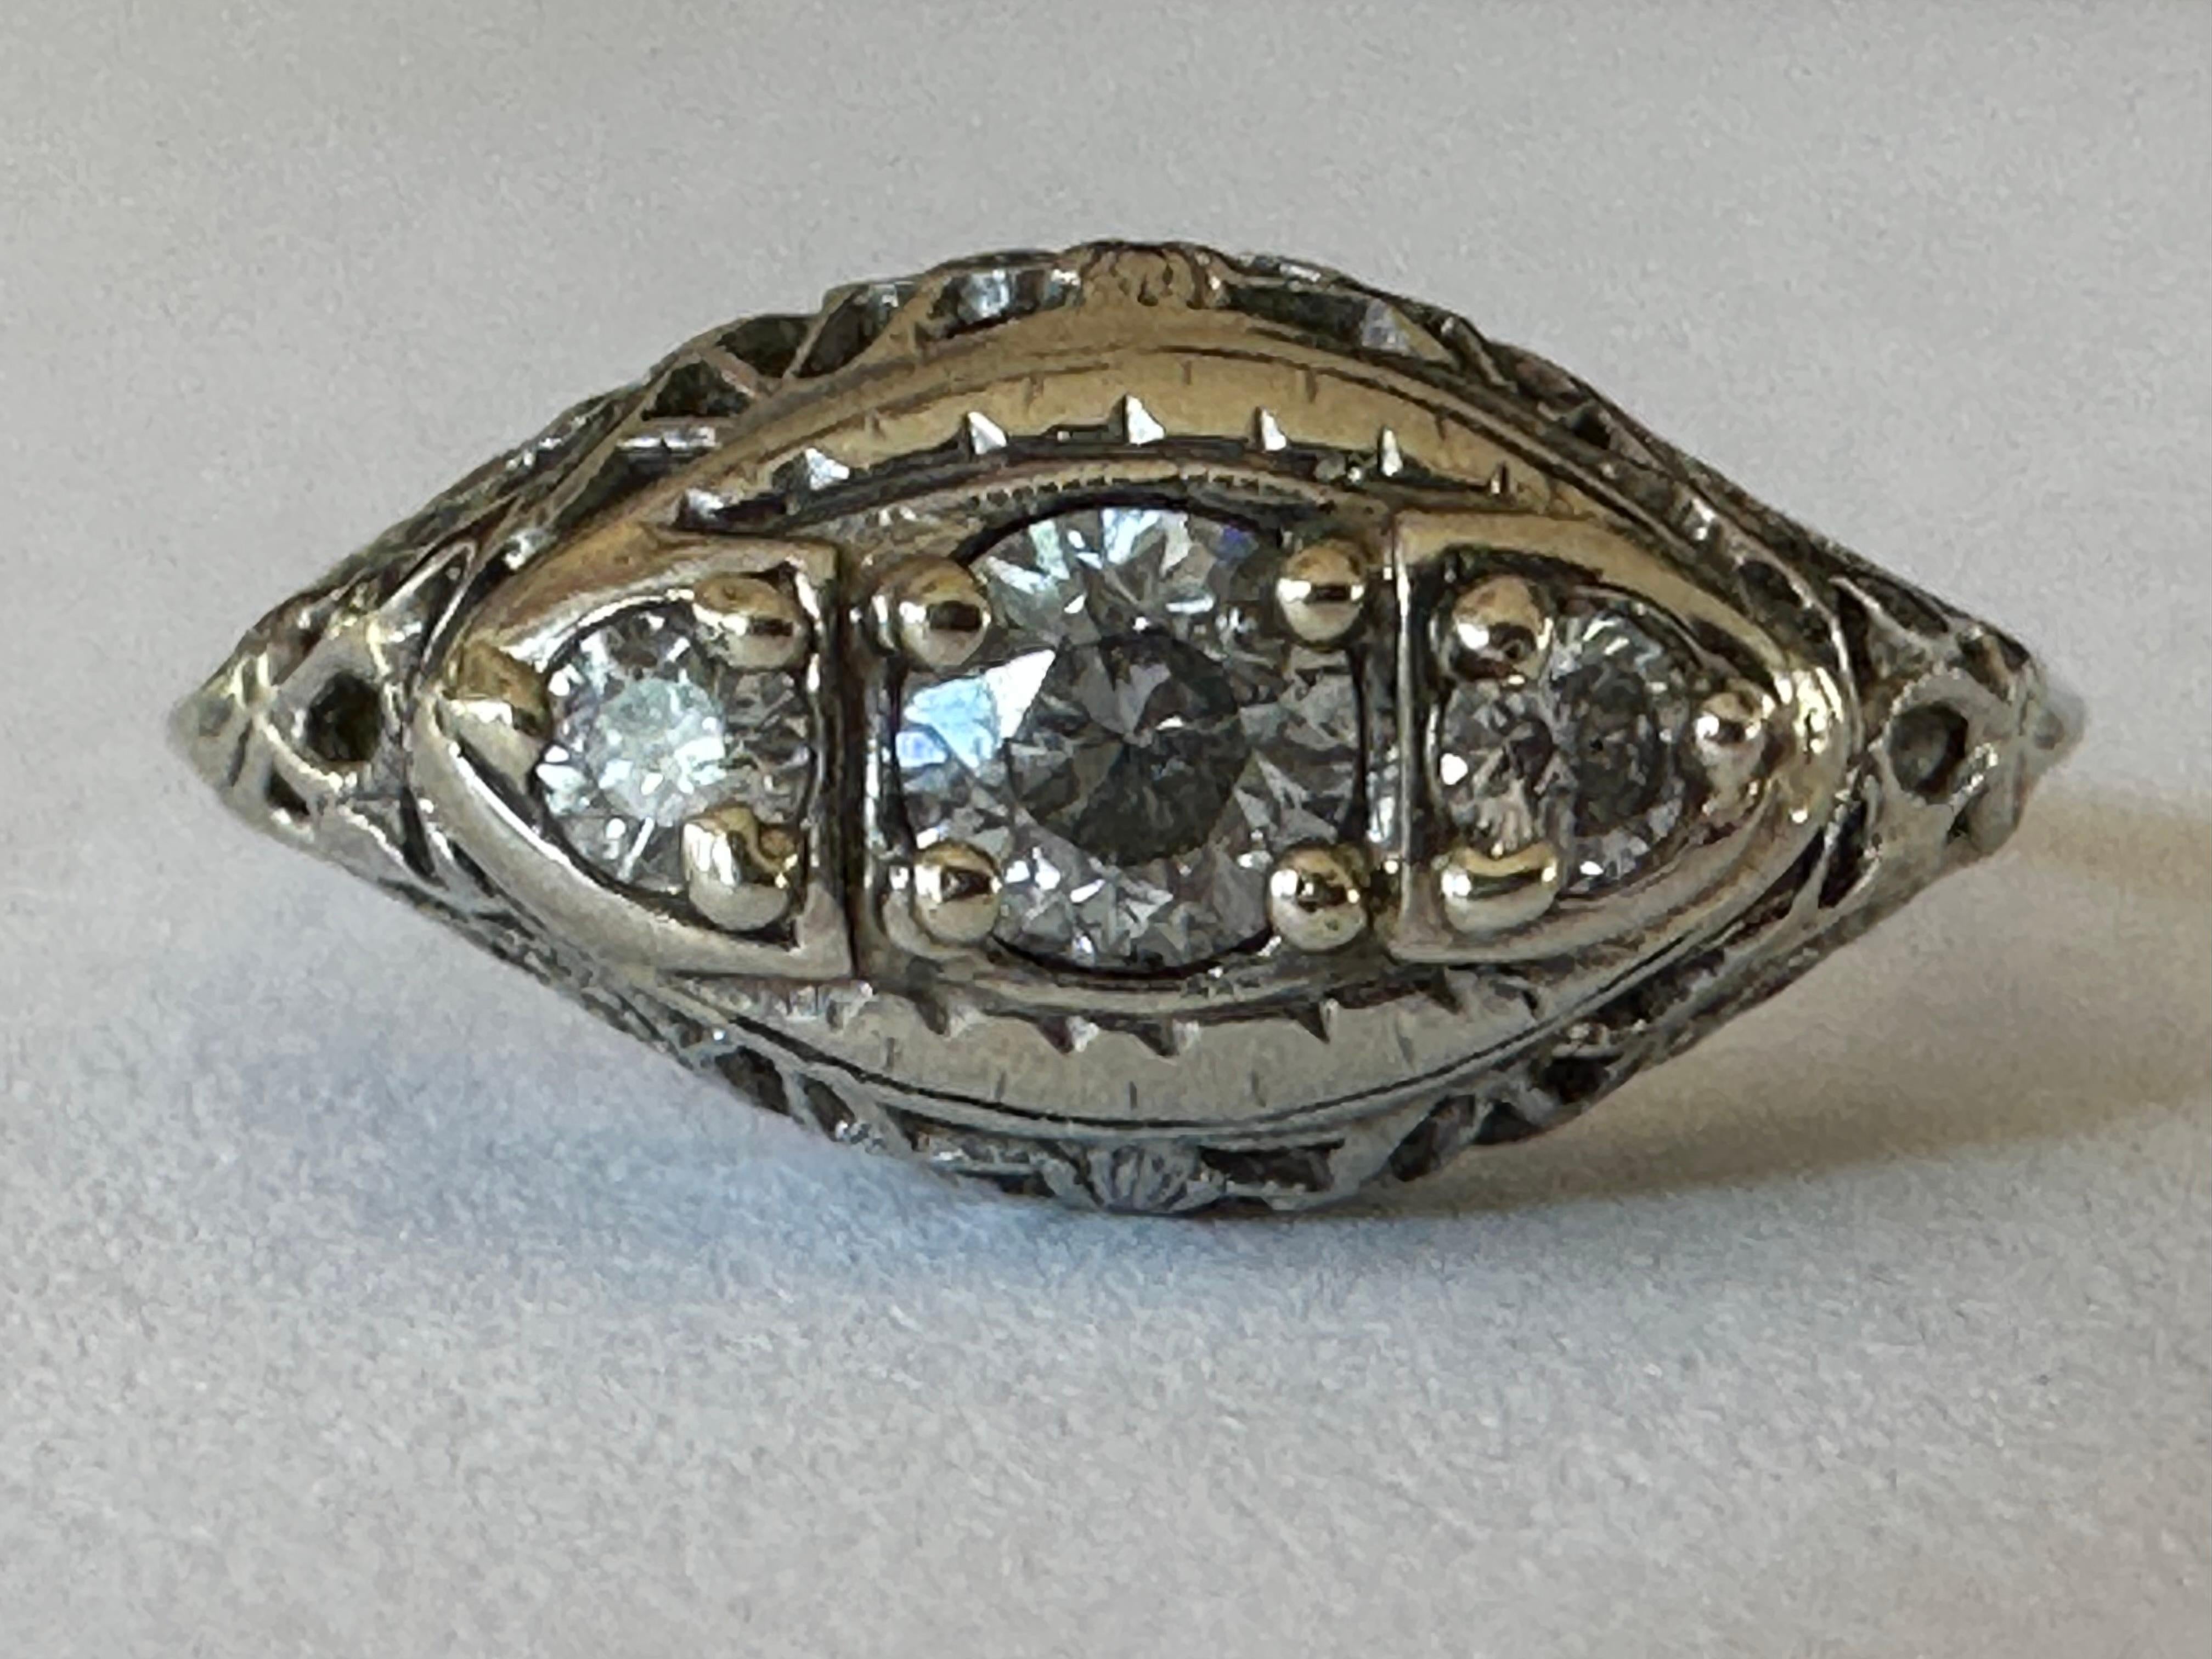 Three Old European cut diamonds line the top of this Art Deco band complemented with fine filigree and set in 10K white gold. The center diamond totals approximately 0.20 carats and is flanked by two smaller diamonds each totaling approximately 0.05